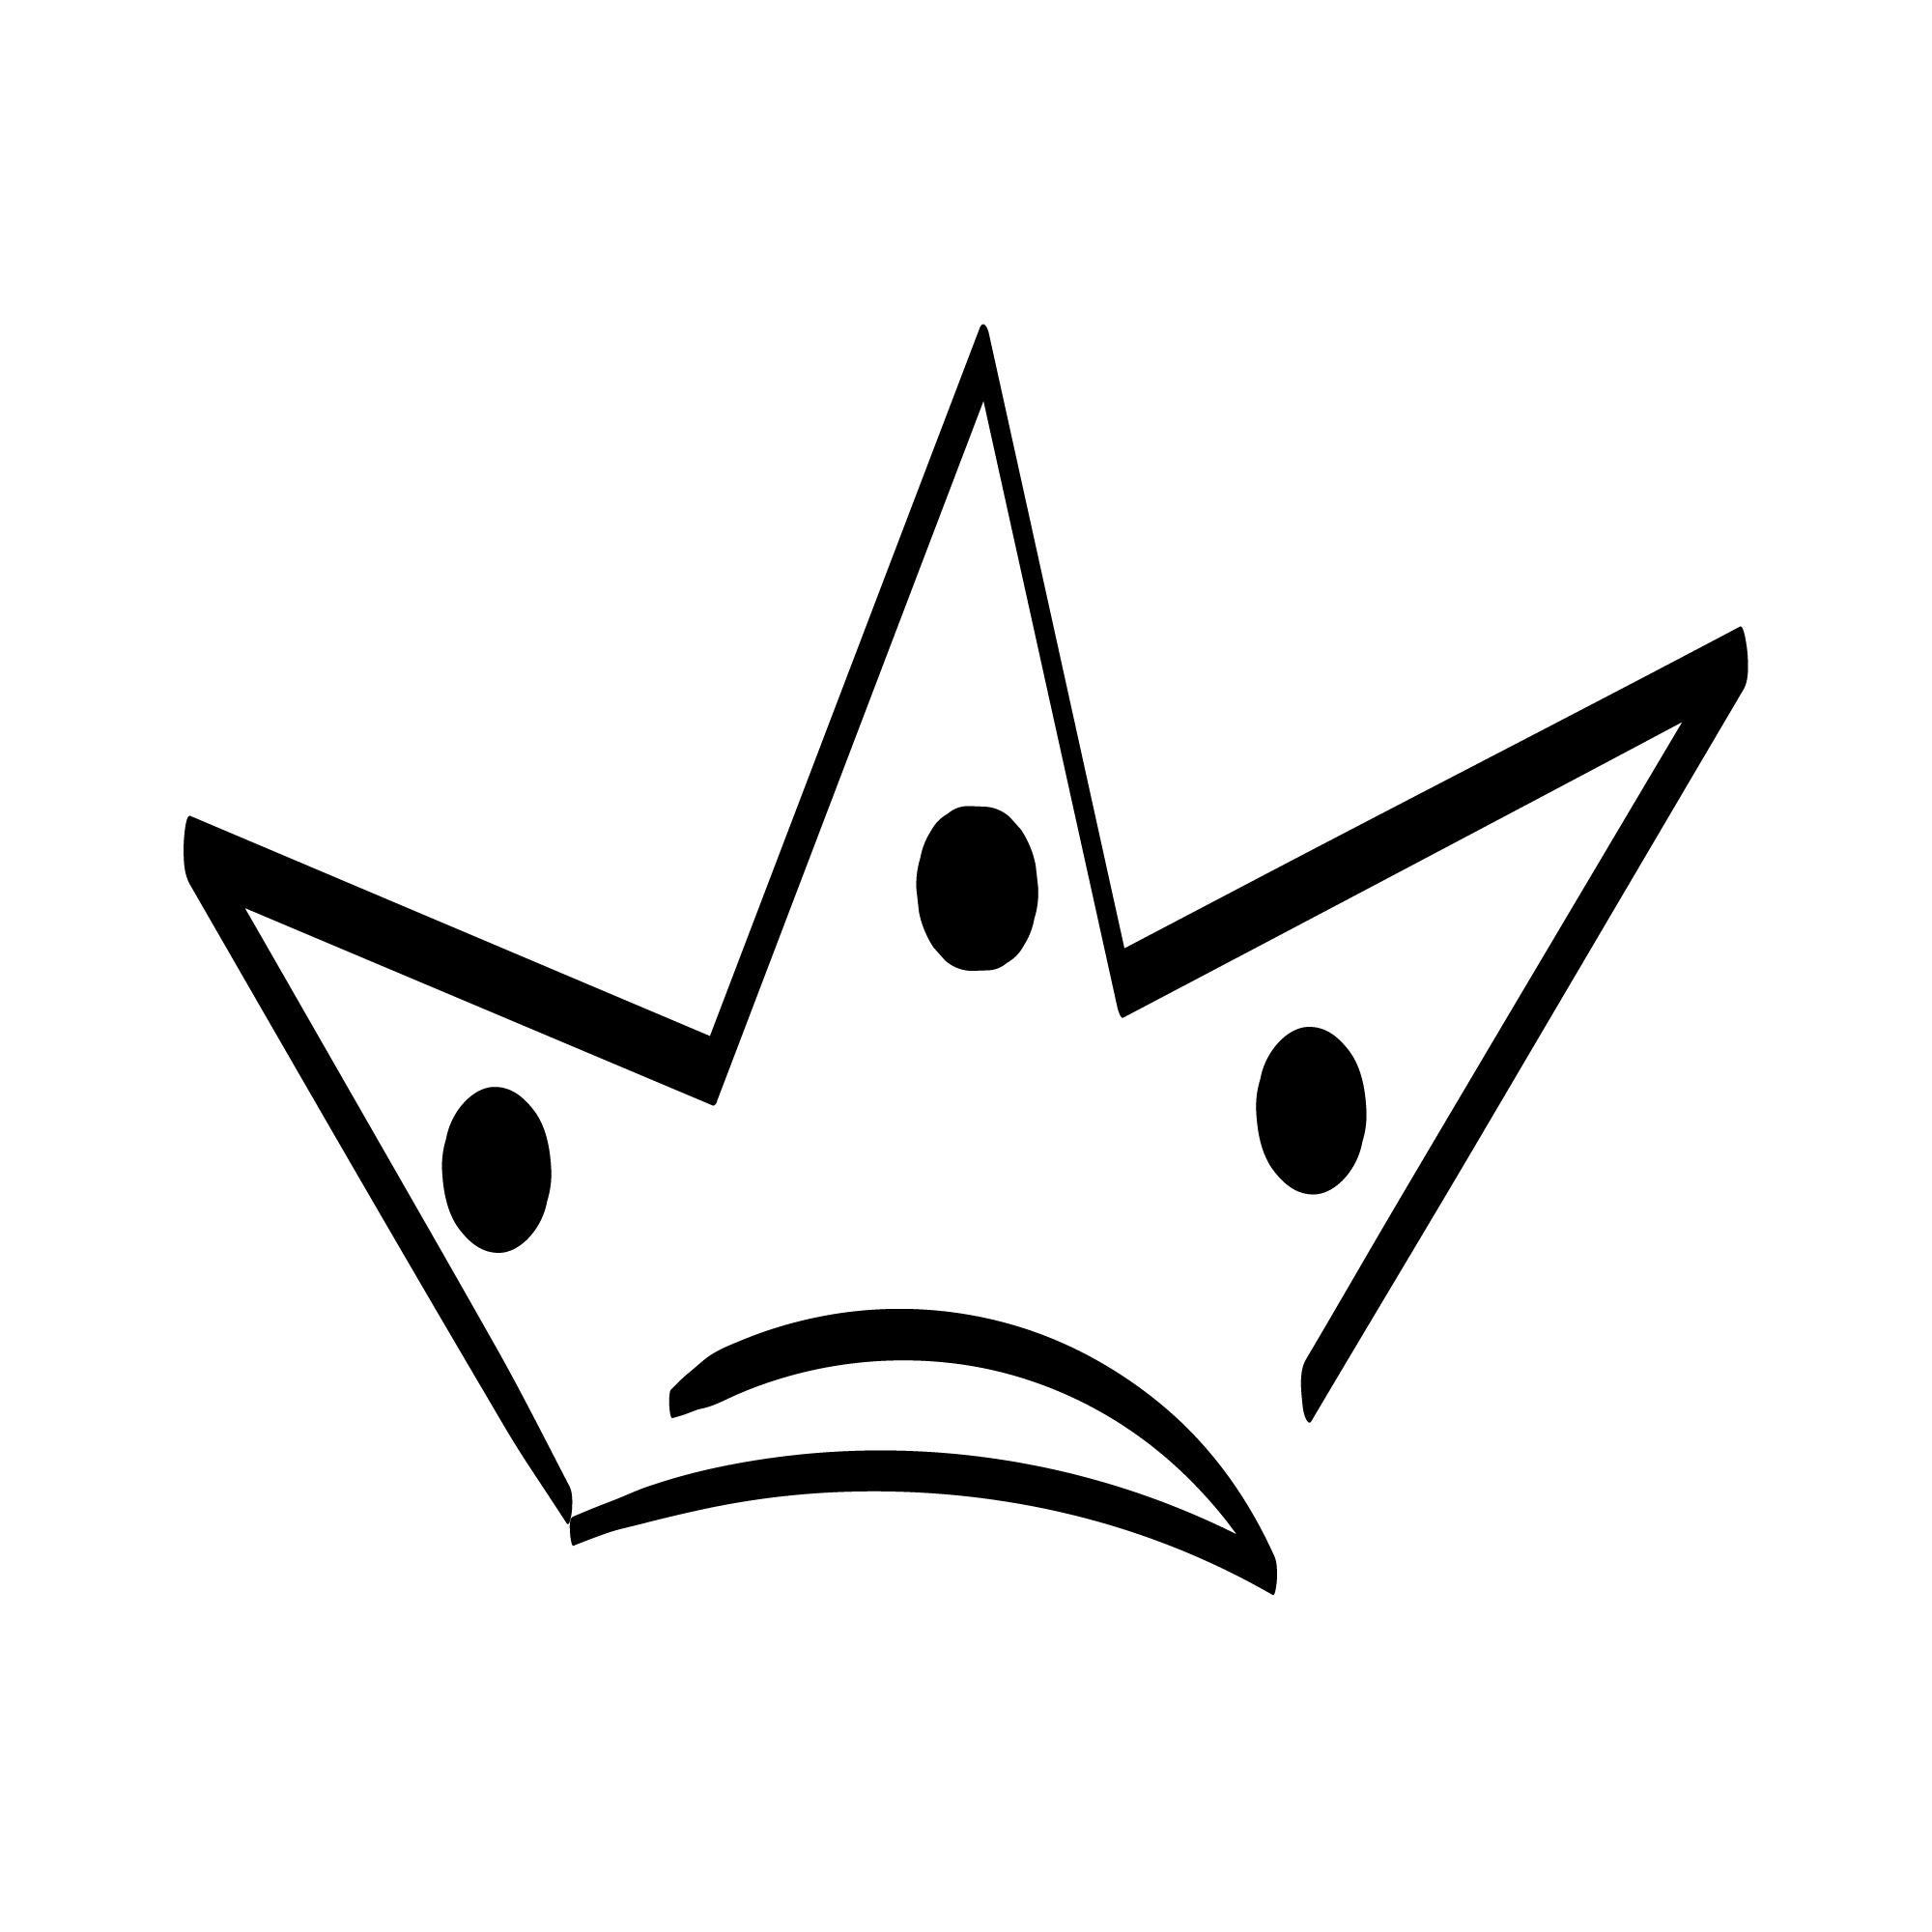 11 Hand Drawn Doodle Crowns for your design.